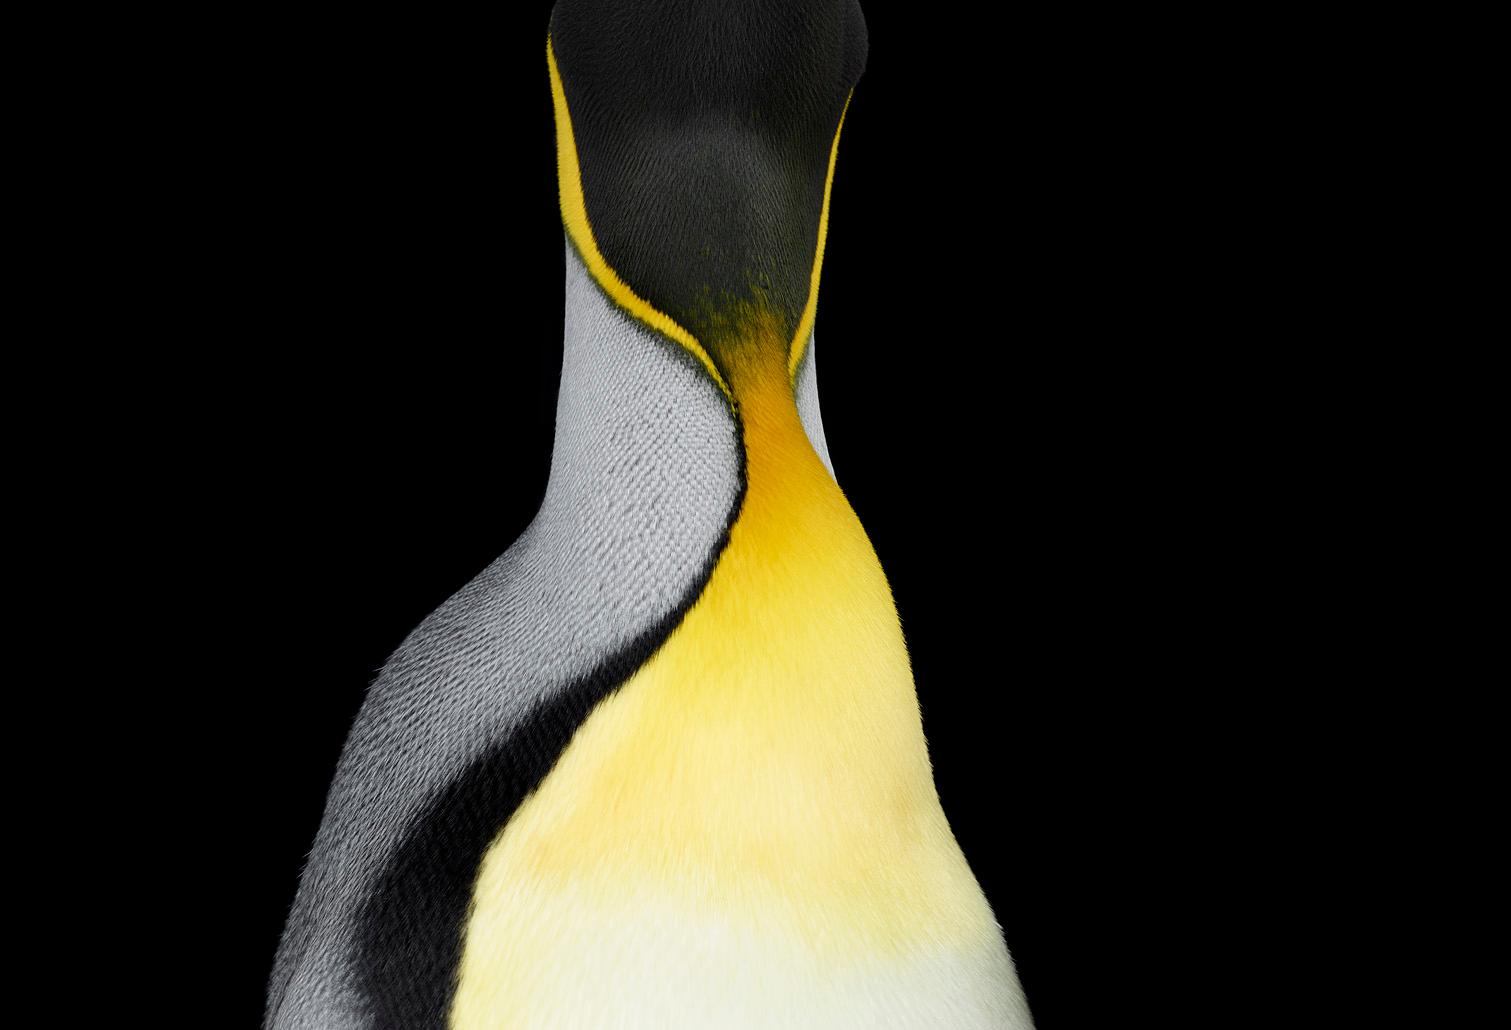 King Penguin #4, limited edition archival ink photograph, signed and numbered - Photograph by Brad Wilson